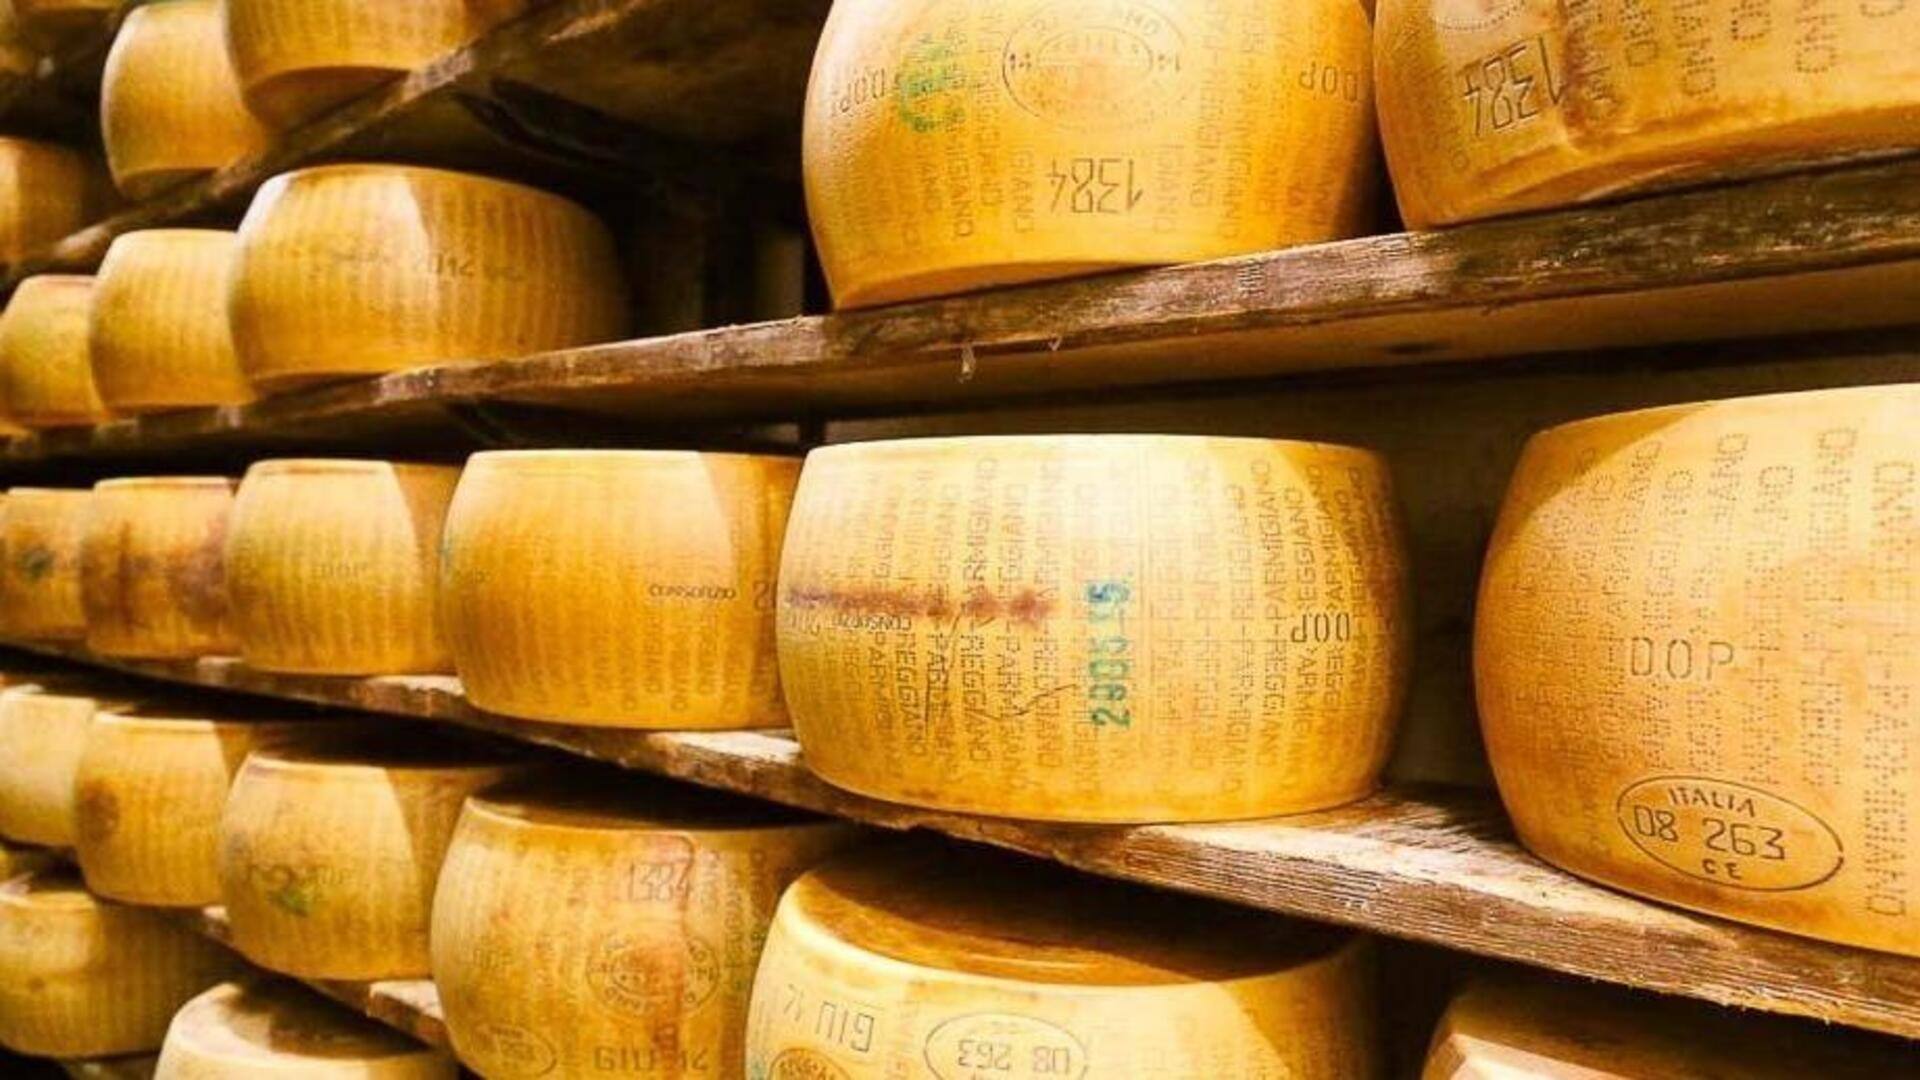 Parmesan cheese makers fight fakes by incorporating edible microchips